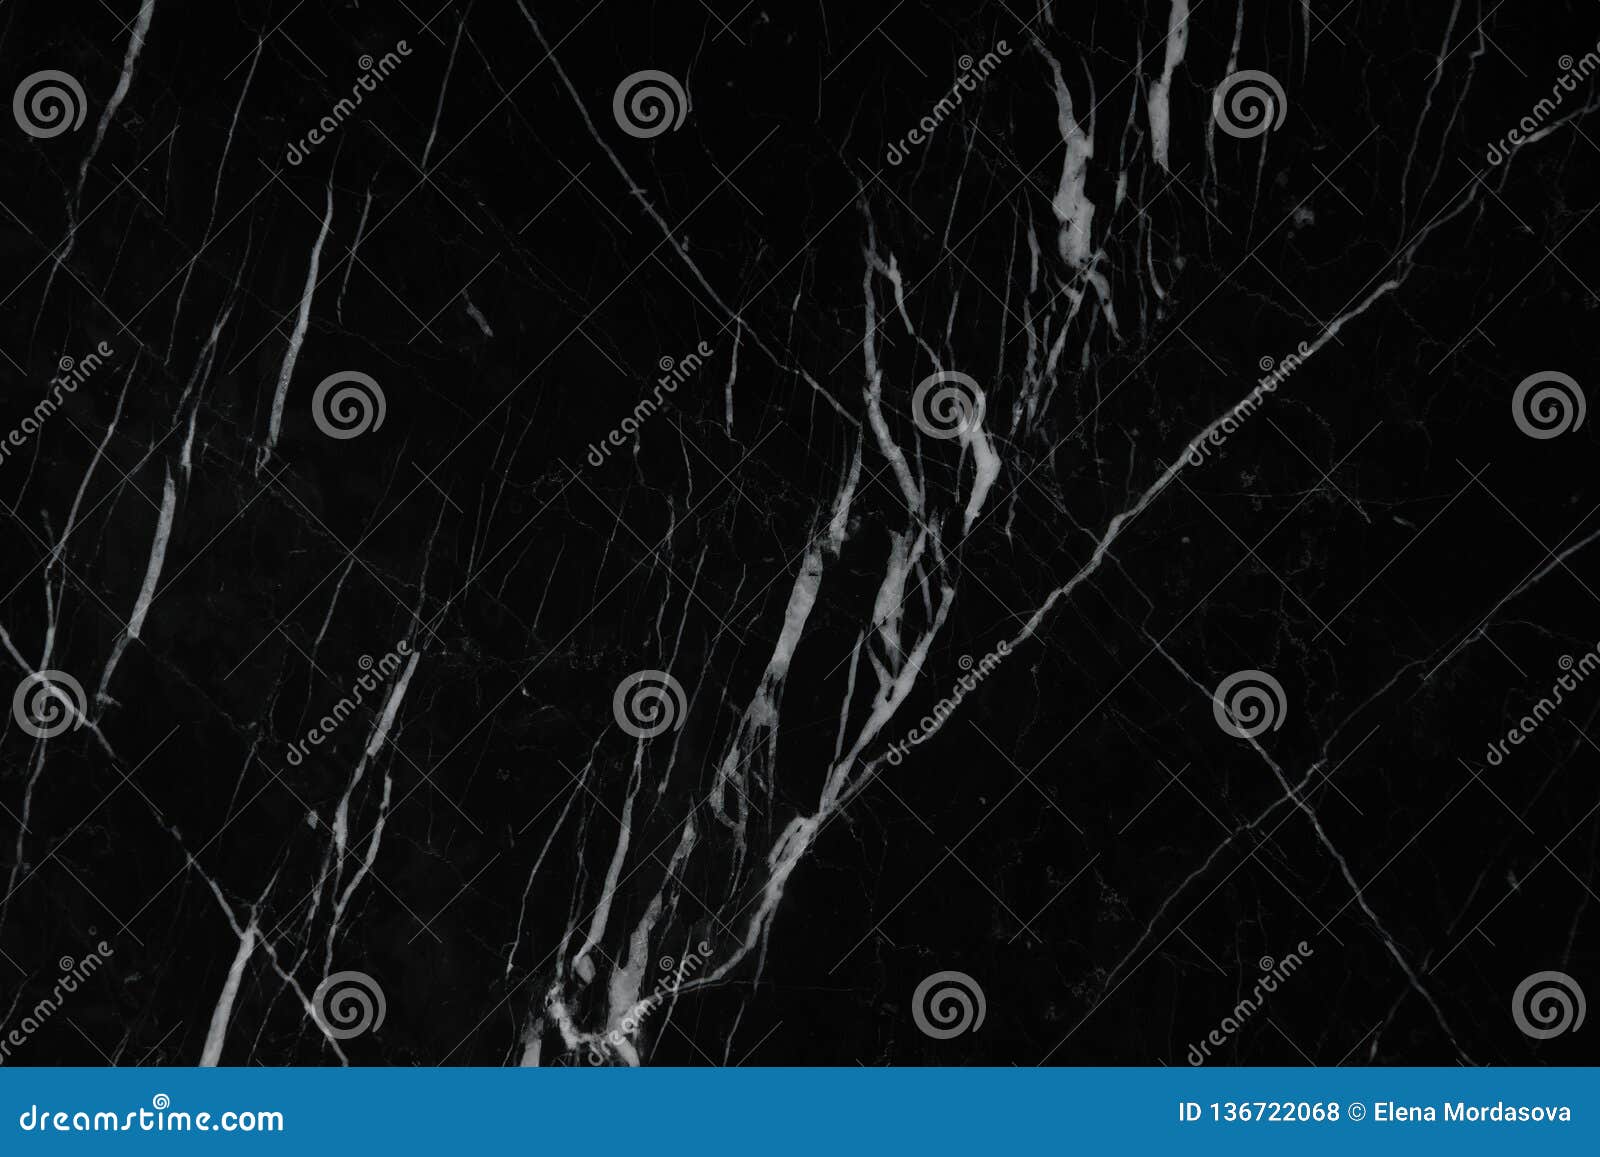 awesome background of black natural stone marble with a white pattern called nero marquina